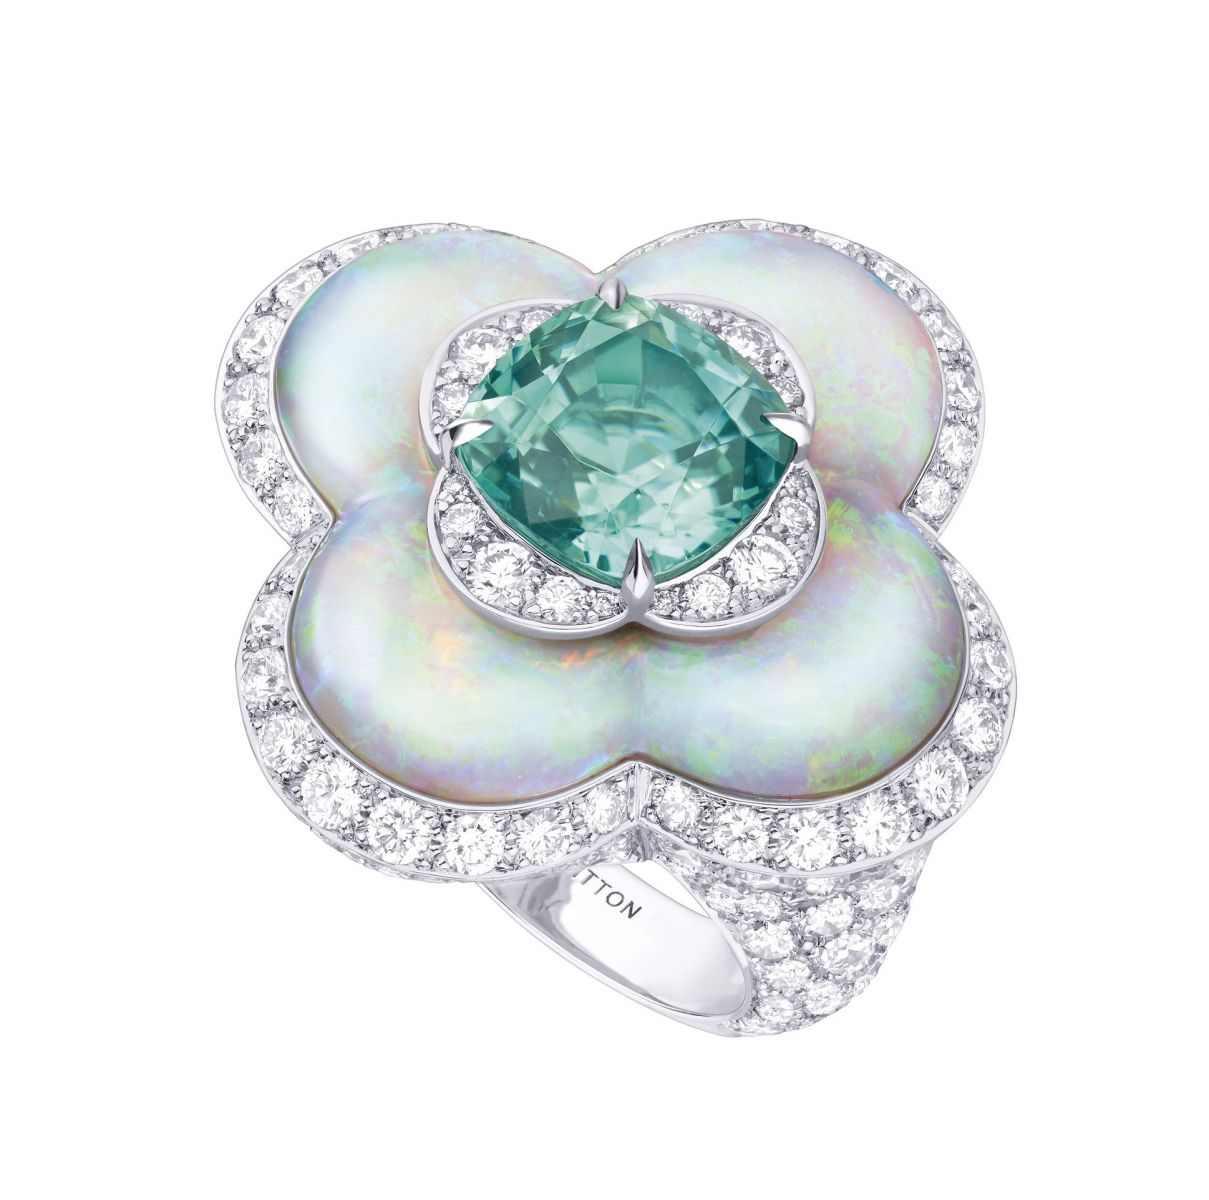 Incredible gems “bloom” in Louis Vuitton's “Blossom collection”